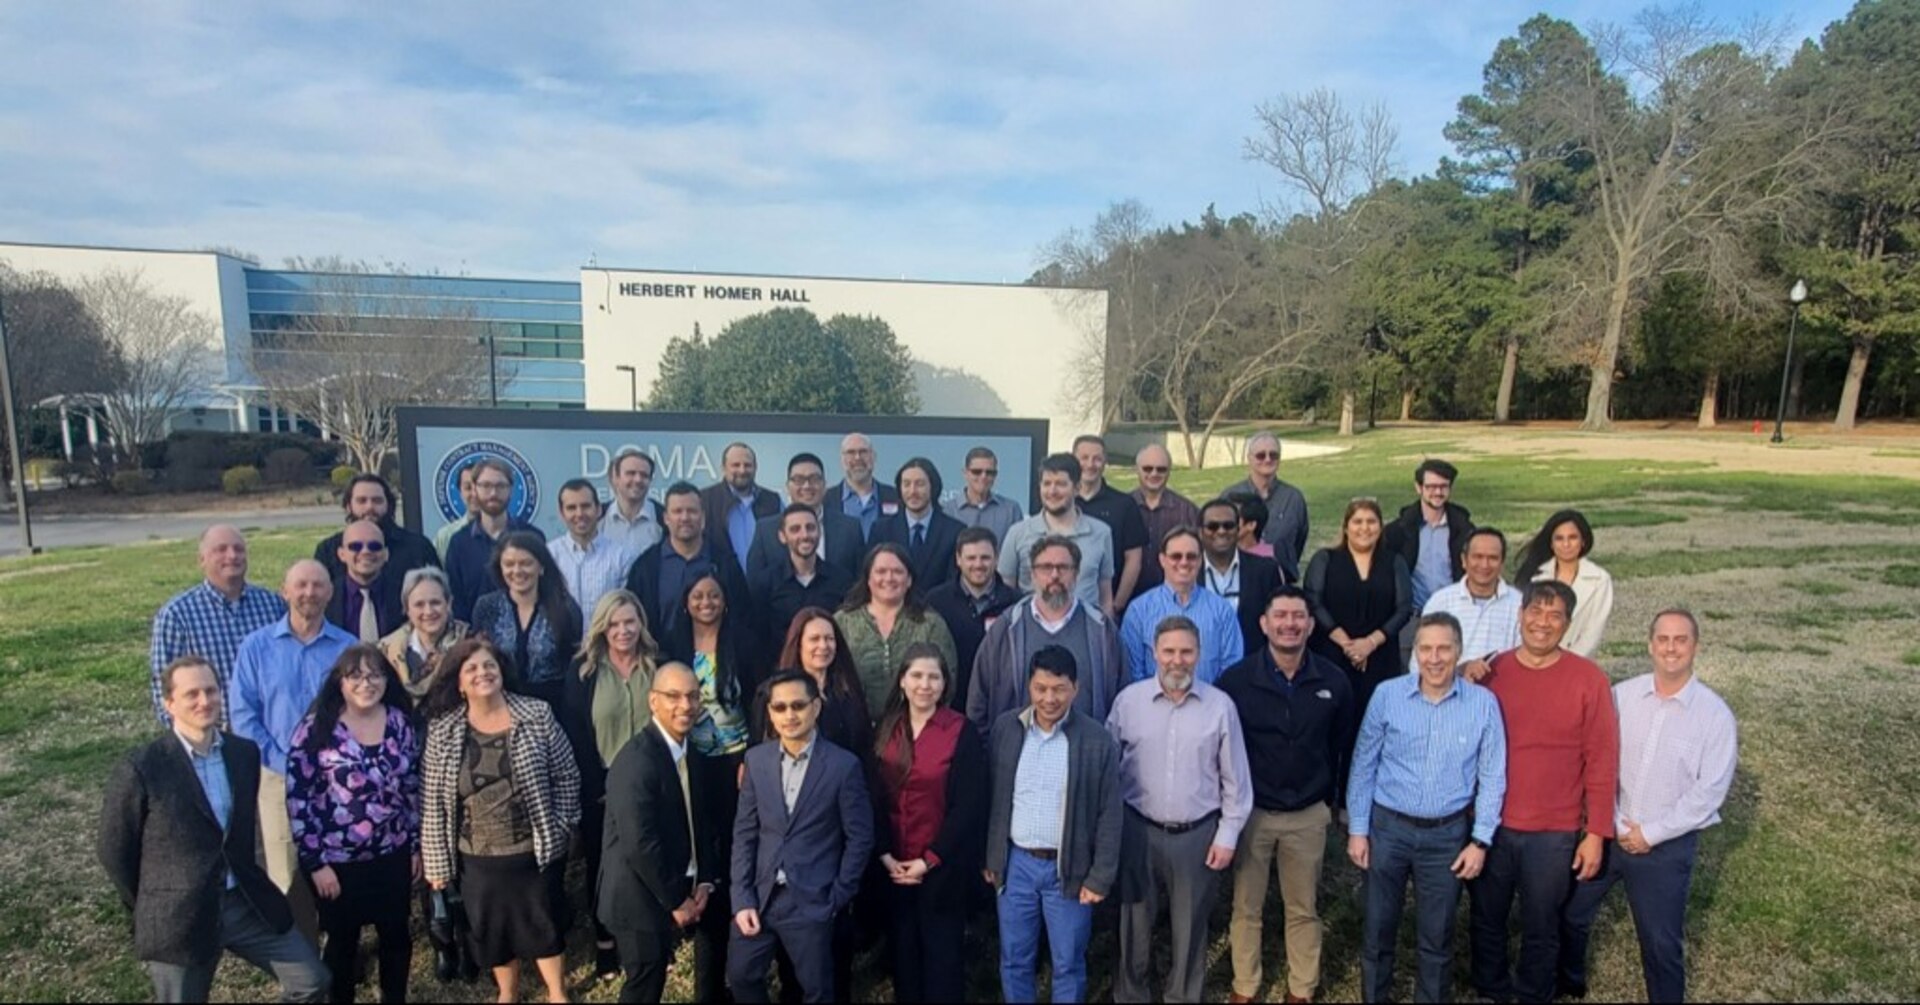 Attendees of the Earned Value Management Center offsite event held last month stand in front of the Defense Contract Management Agency headquarters building in Fort Lee, Virginia. Approximately 80 DCMA employees gathered at the agency headquarters, or attended the event virtually.